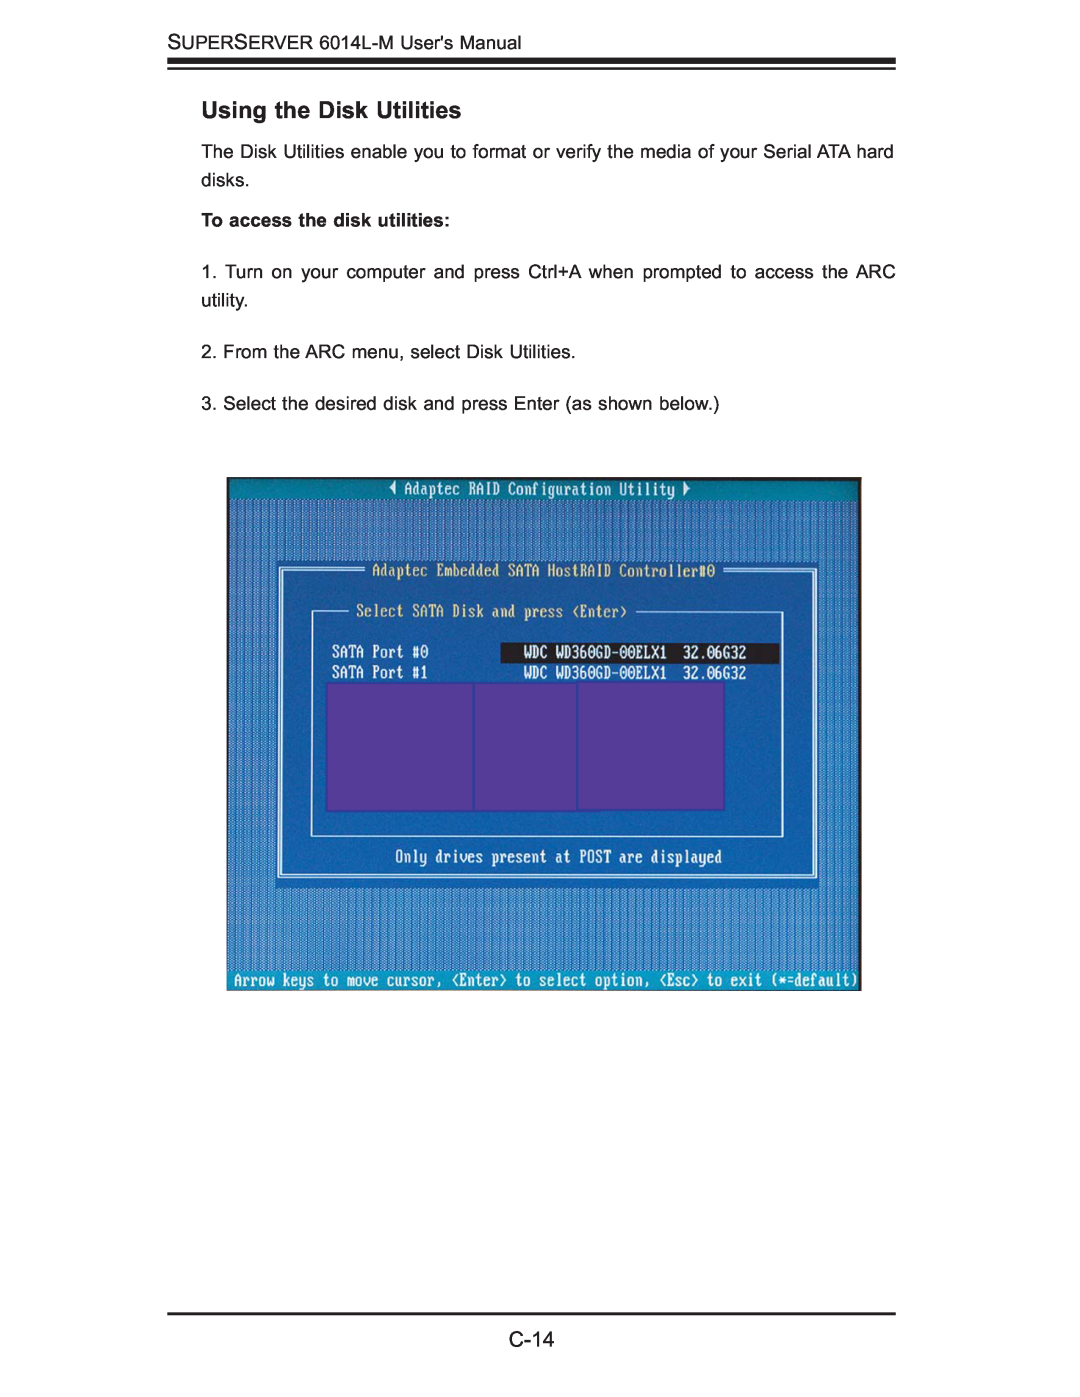 SUPER MICRO Computer 6014L-M manual Using the Disk Utilities, C-14, To access the disk utilities 